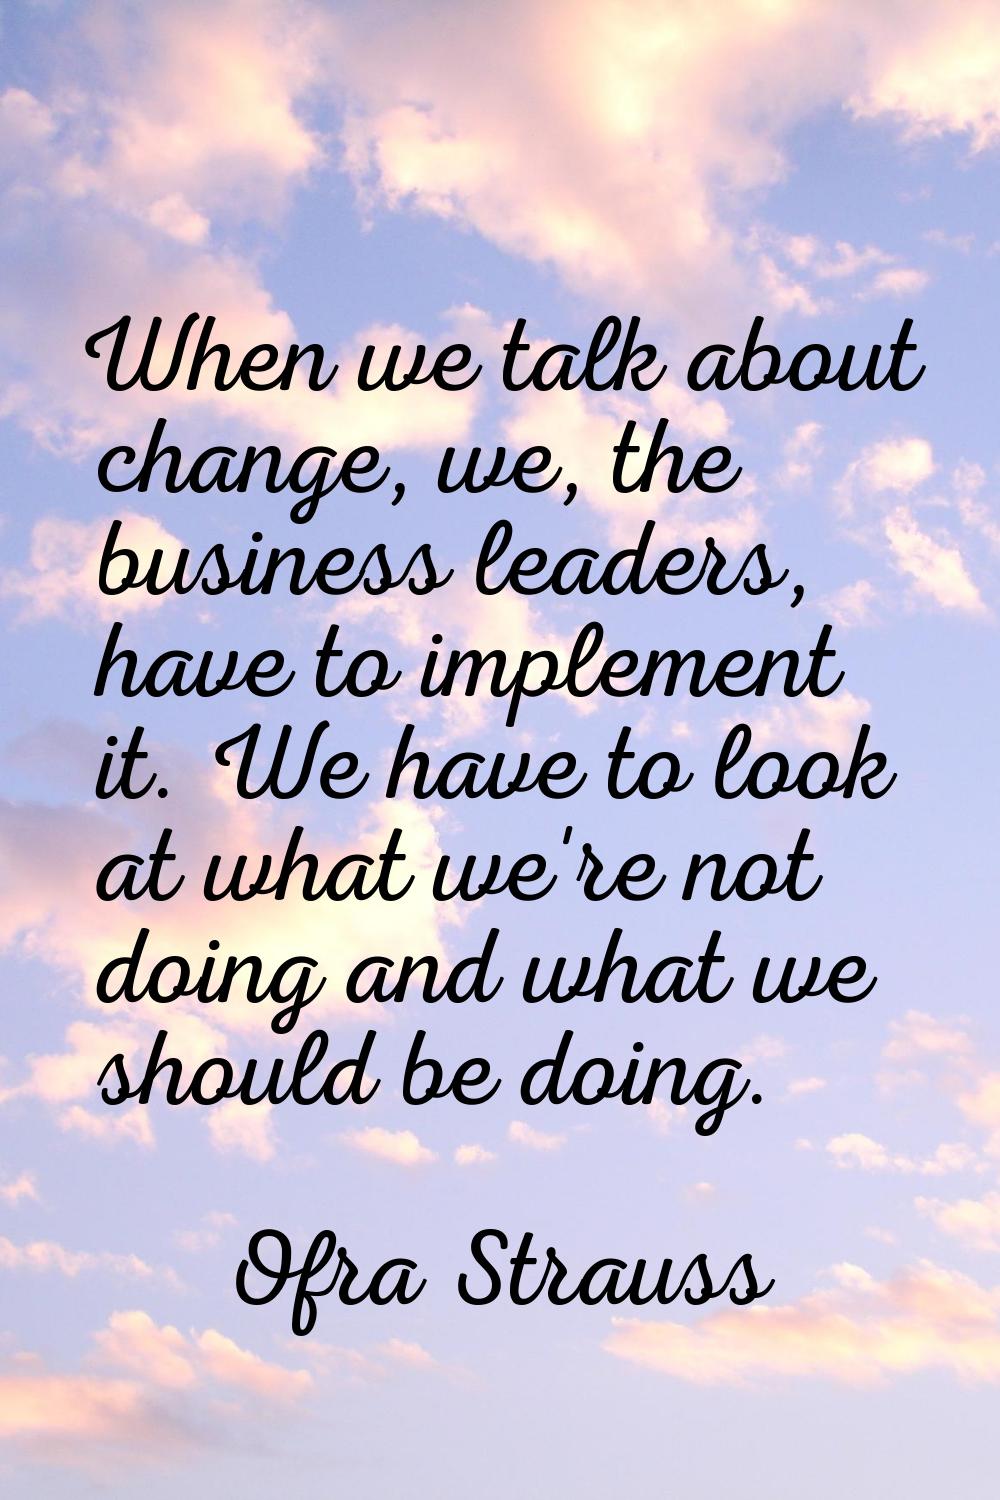 When we talk about change, we, the business leaders, have to implement it. We have to look at what 